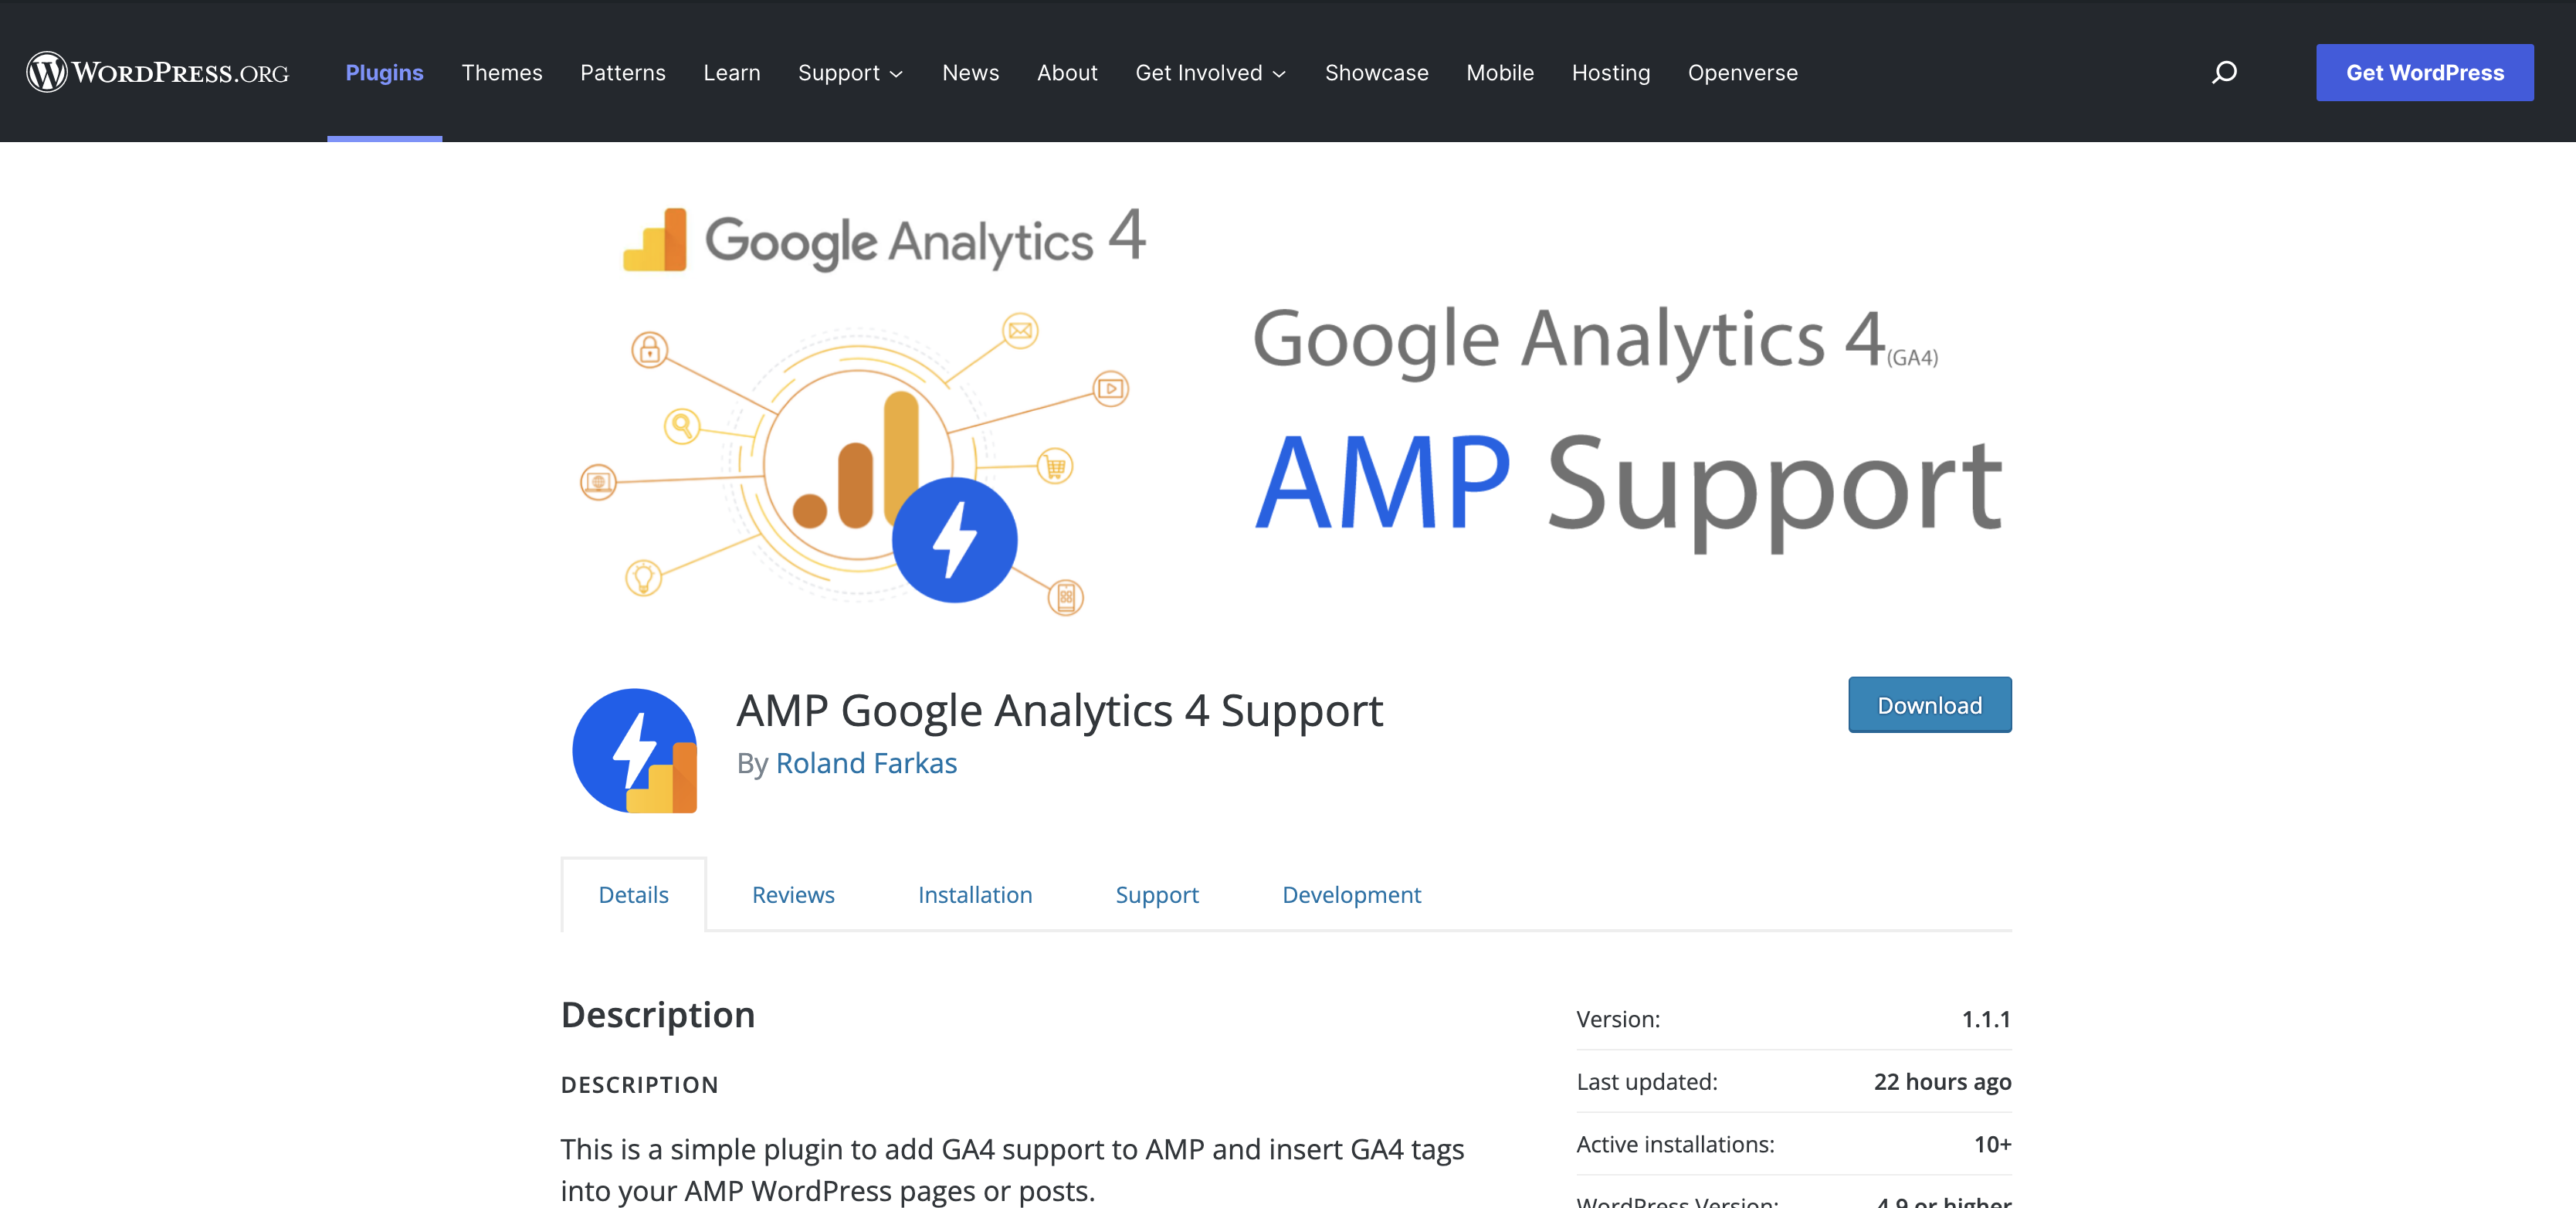 Enable Google Analytics 4 Support to track WordPress AMP pages